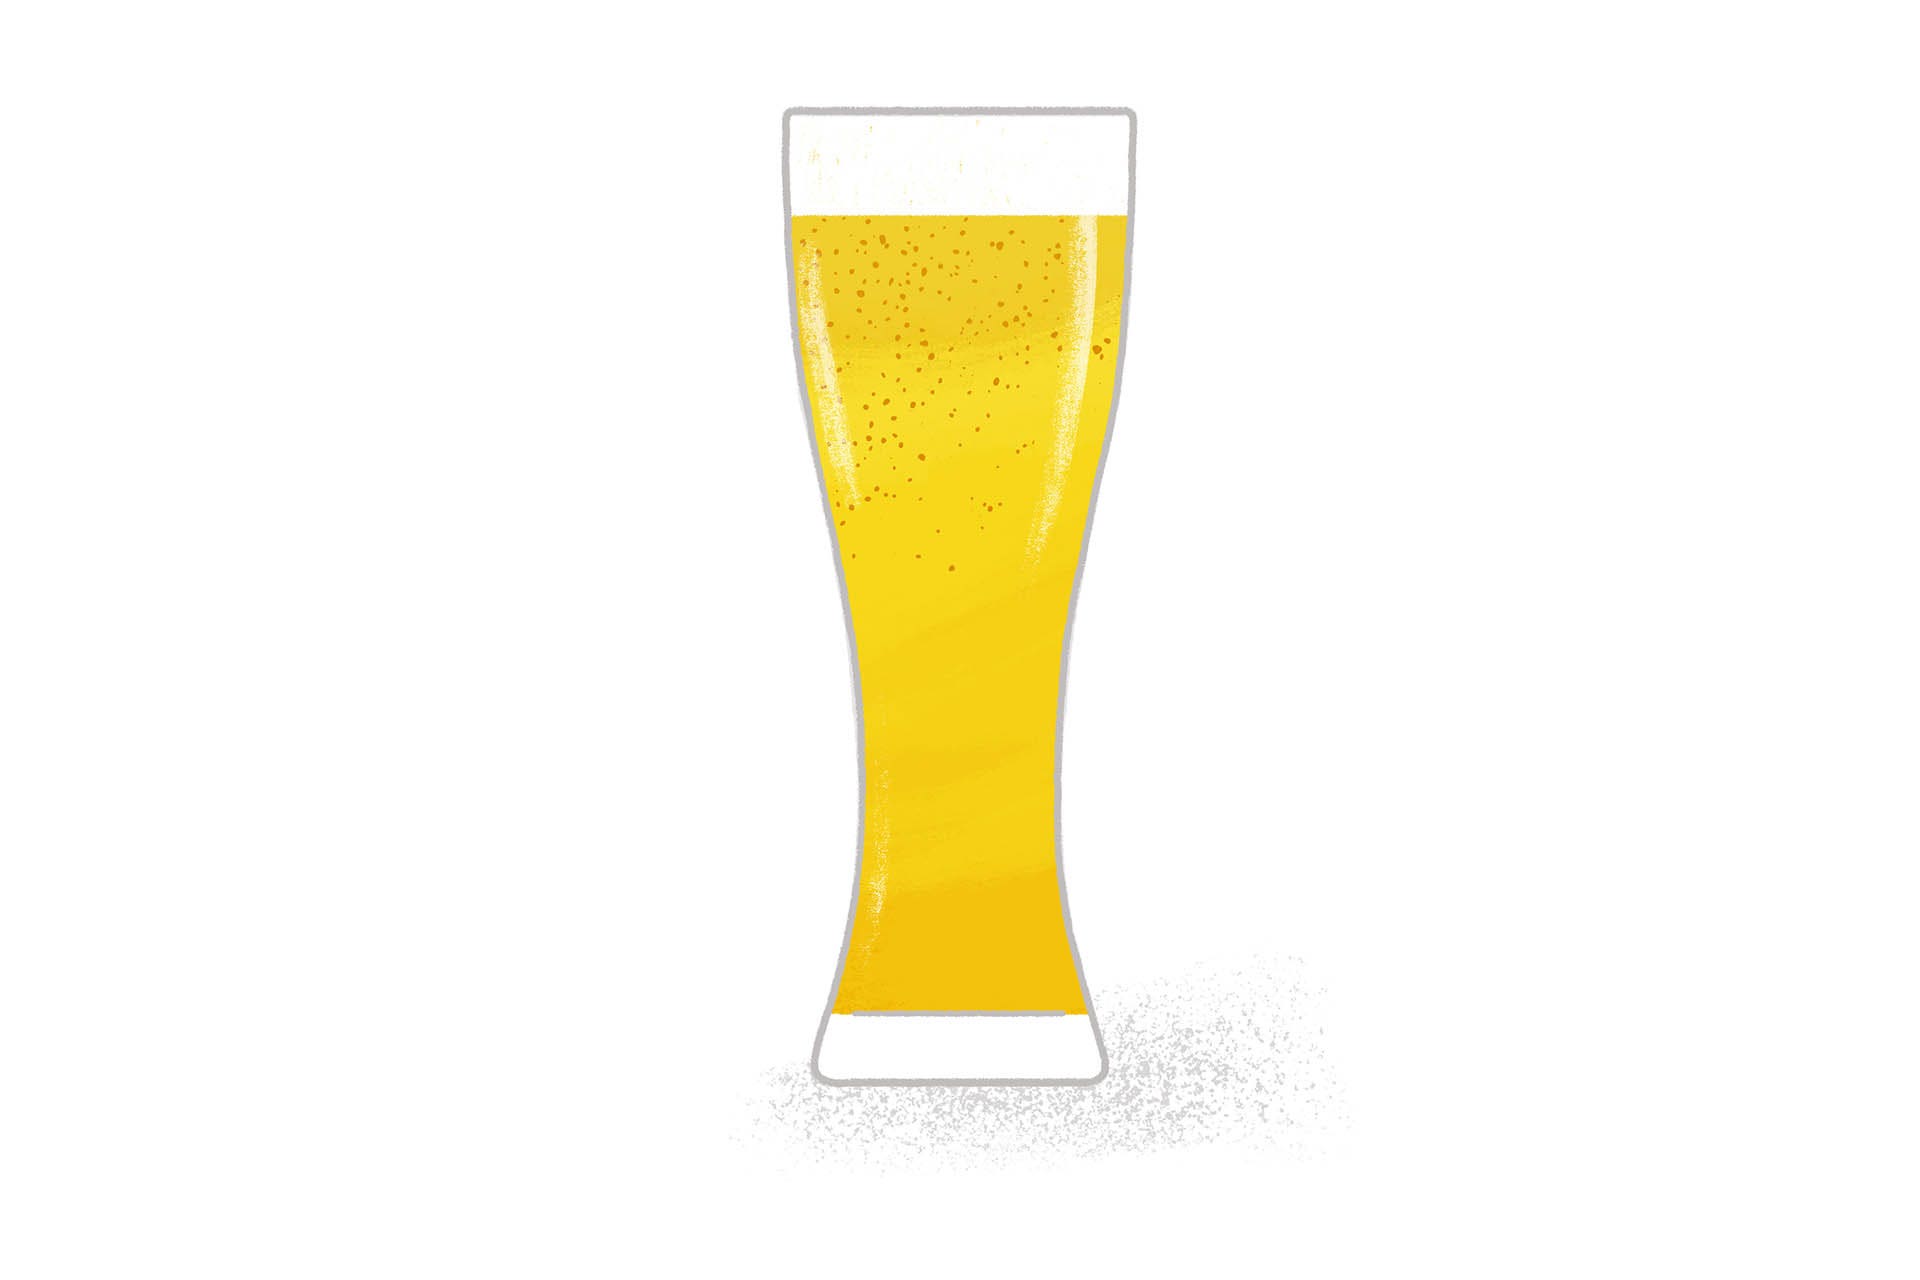 Wheat beer glass